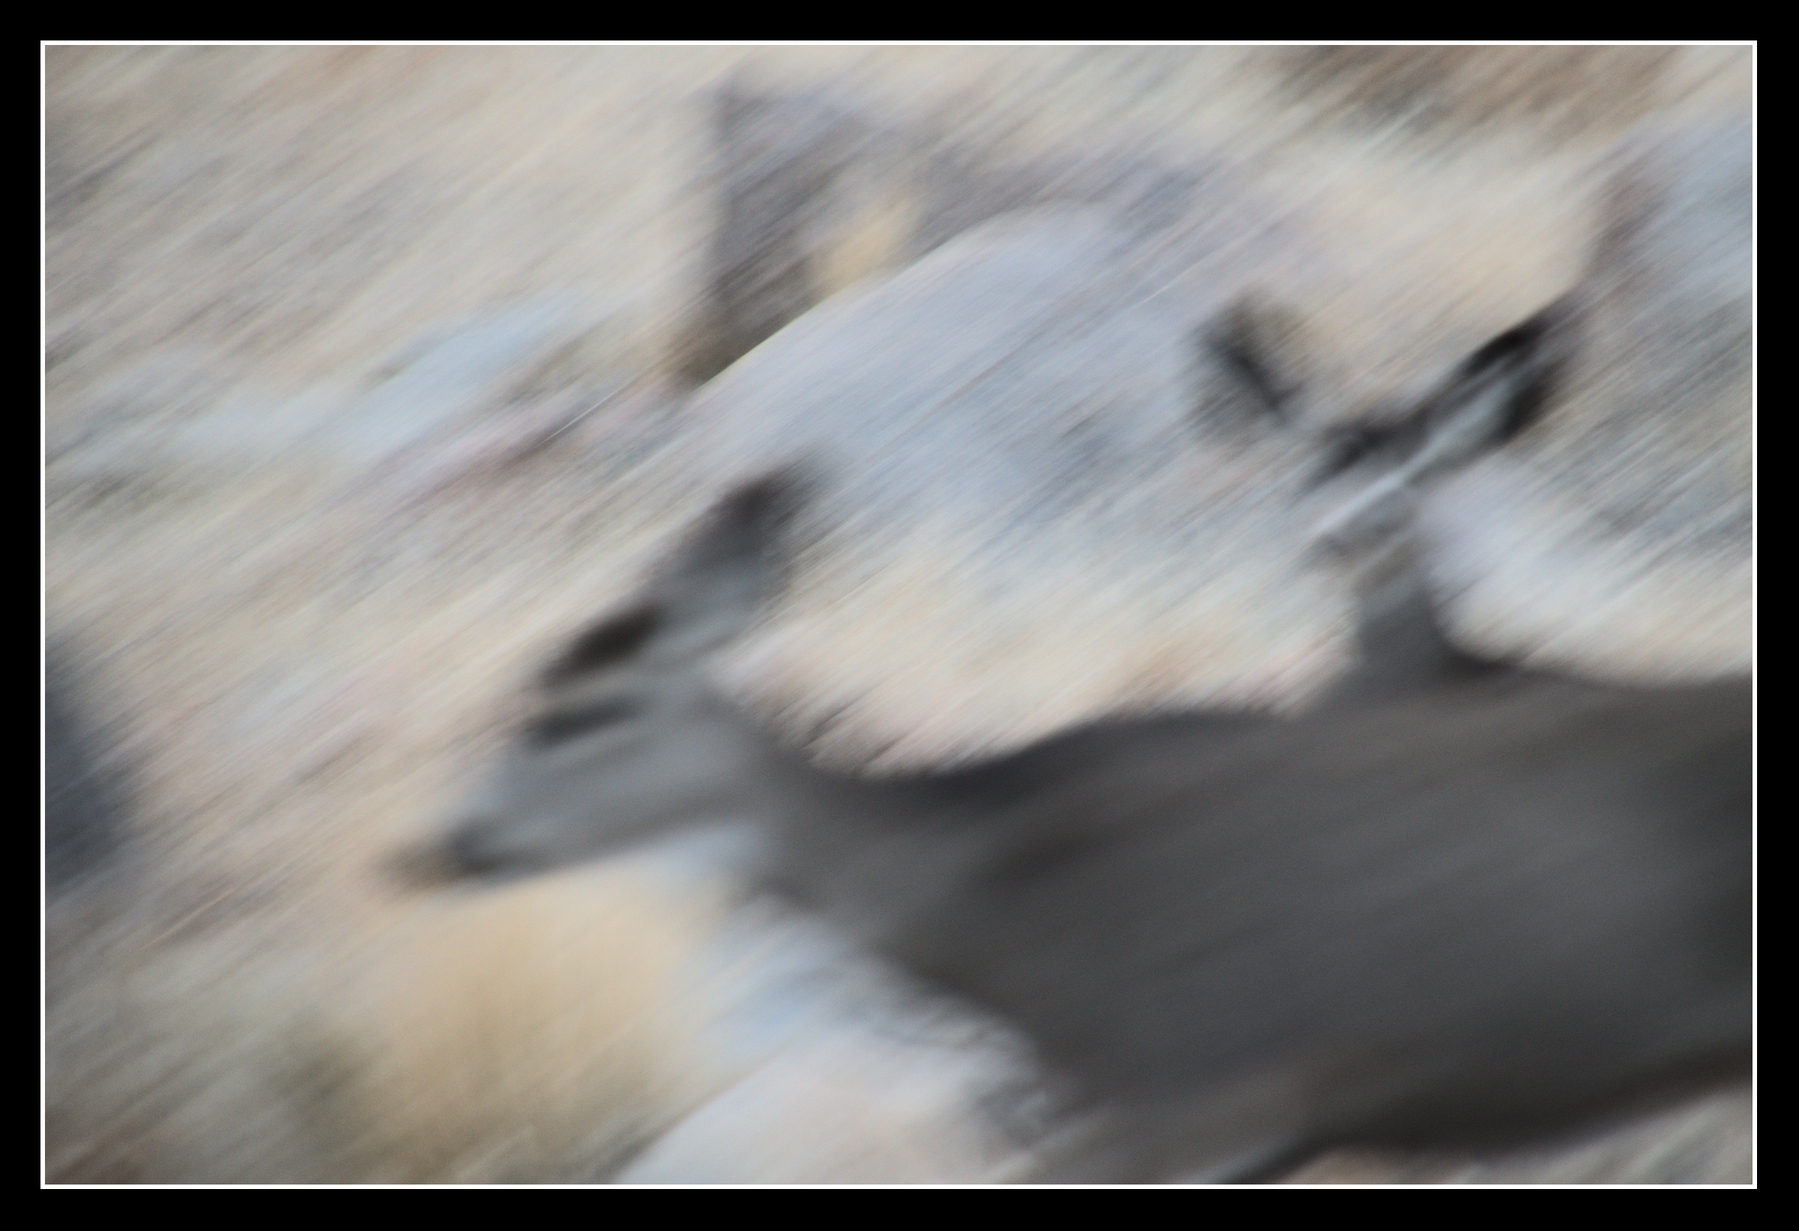 The same two mule deer, but blurry with motion.